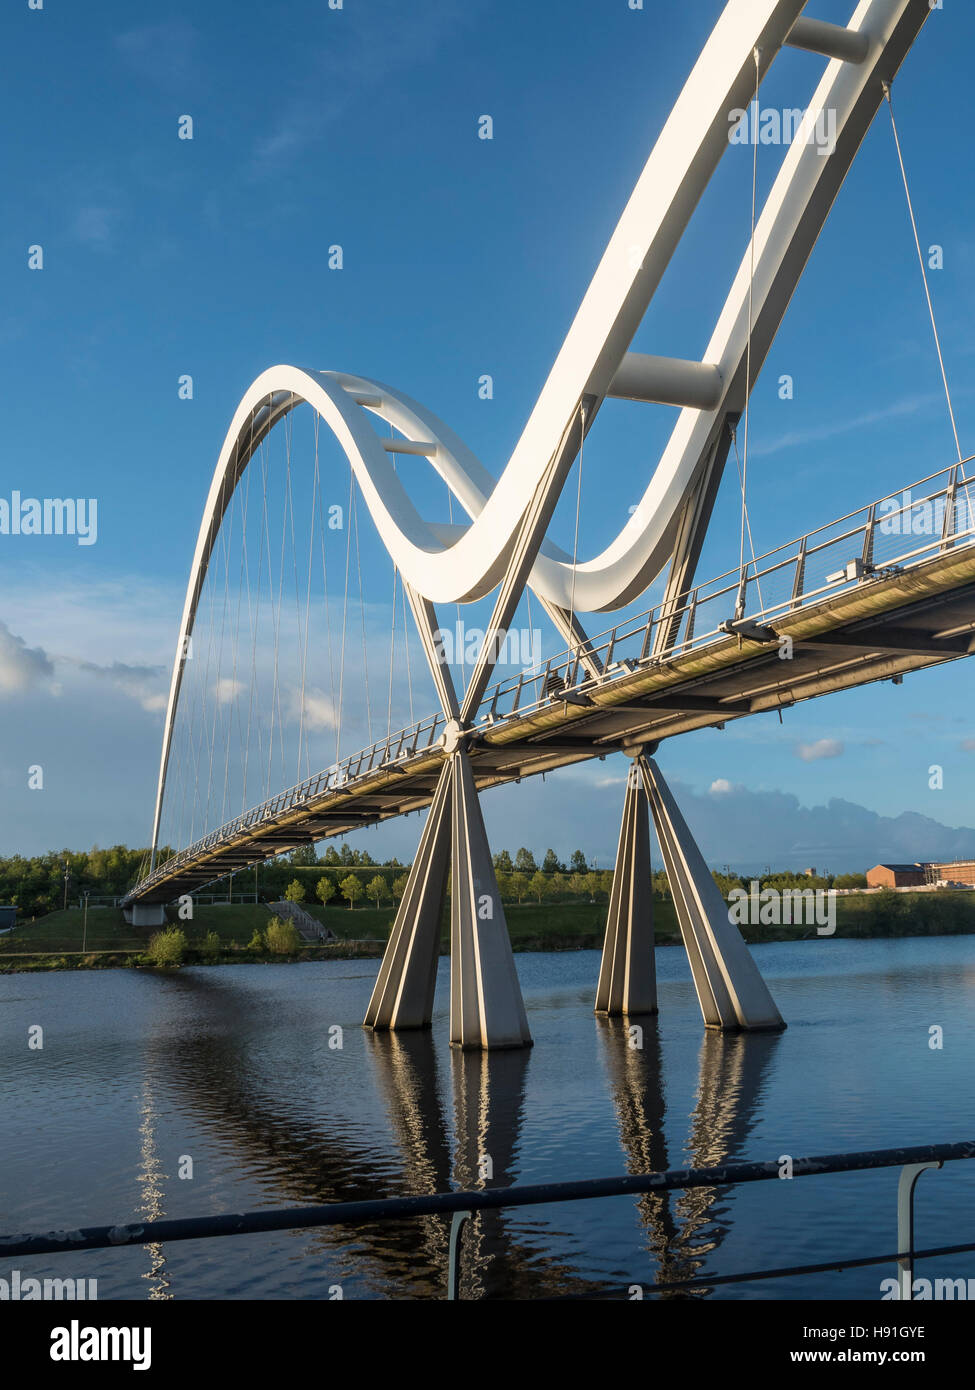 The Infiniti Bridge over the River Tees between Stockton and Thornaby ...